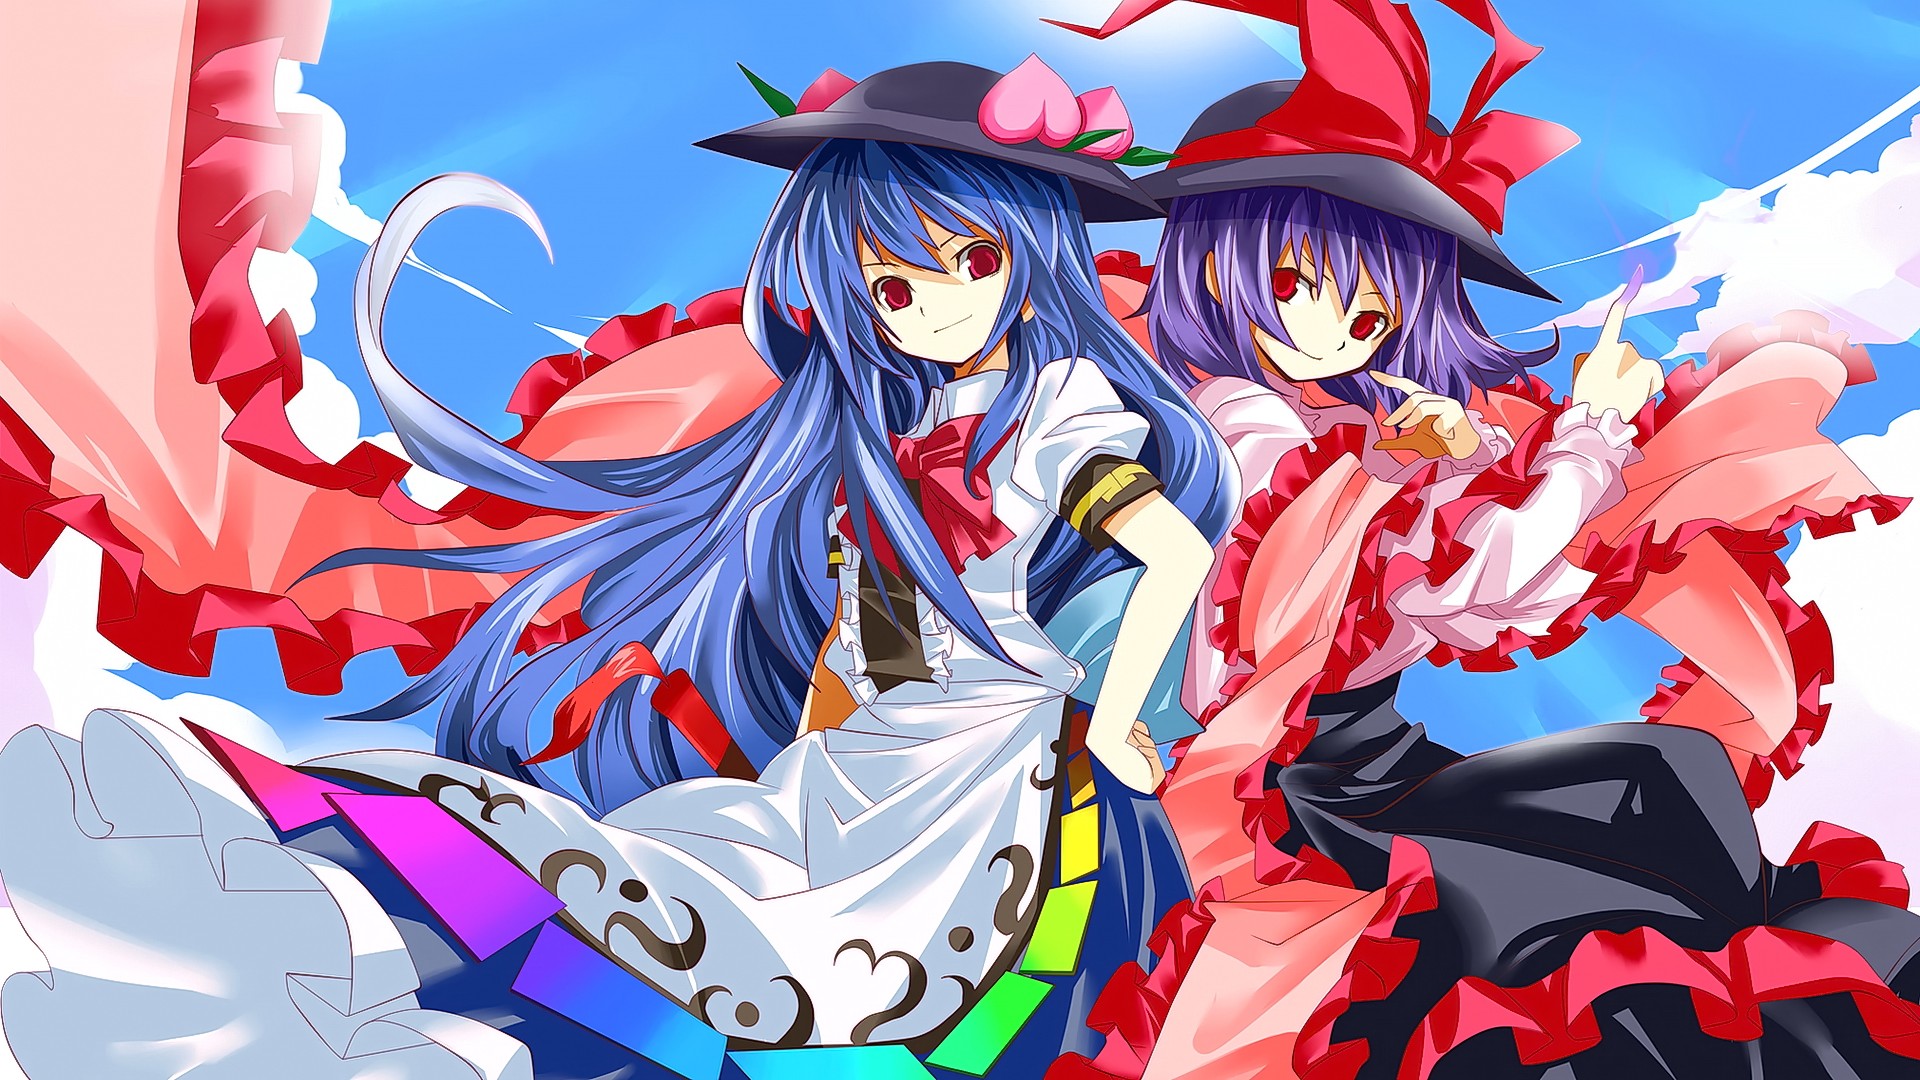 Anime Anime Girls Blue Hair Short Hair Red Eyes Looking At Viewer Hat Sky Clouds Smiling Touhou Hina 1920x1080